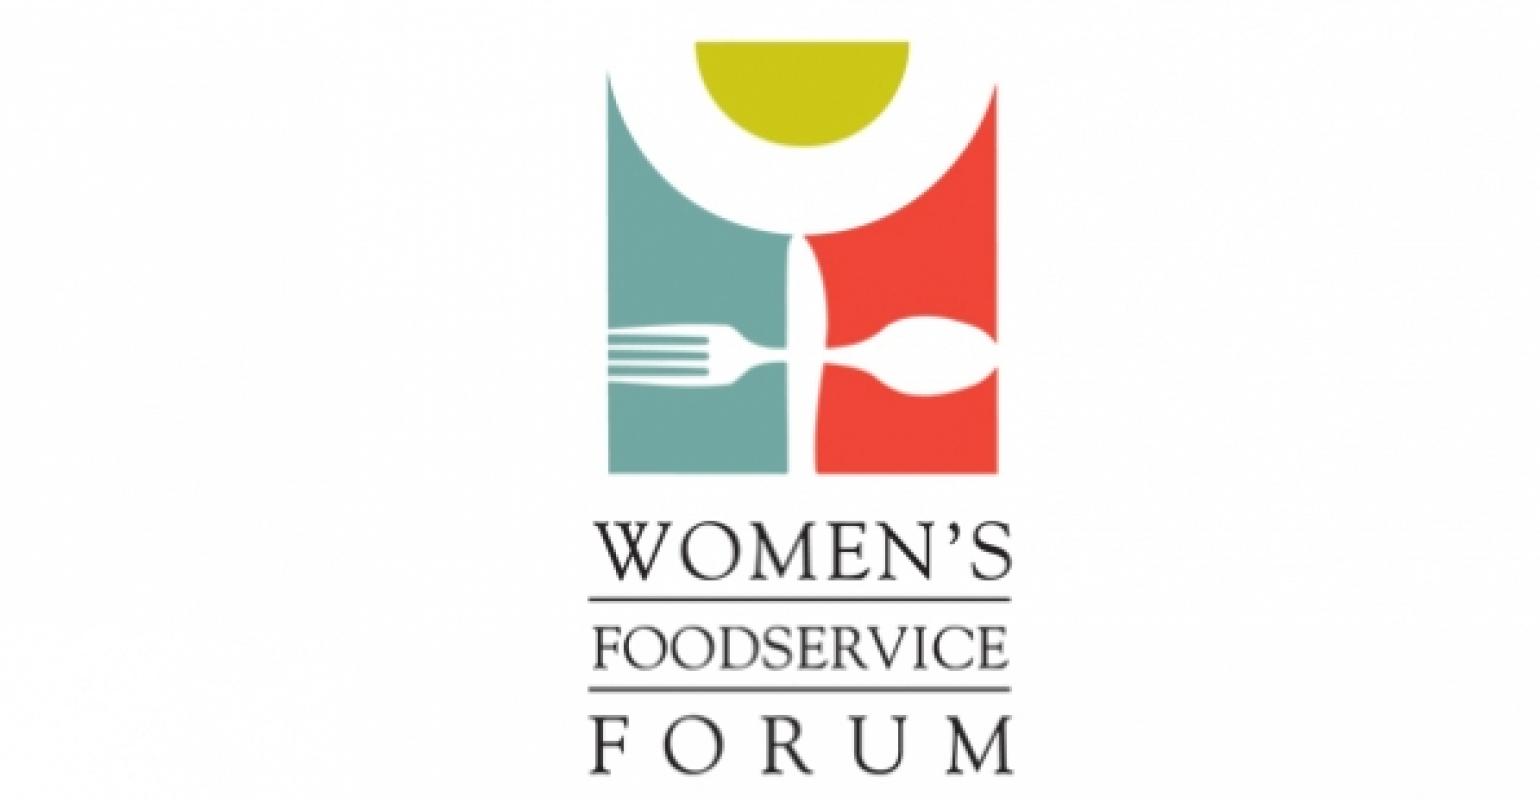 Women's Foodservice Forum honors emerging female leaders Nation's